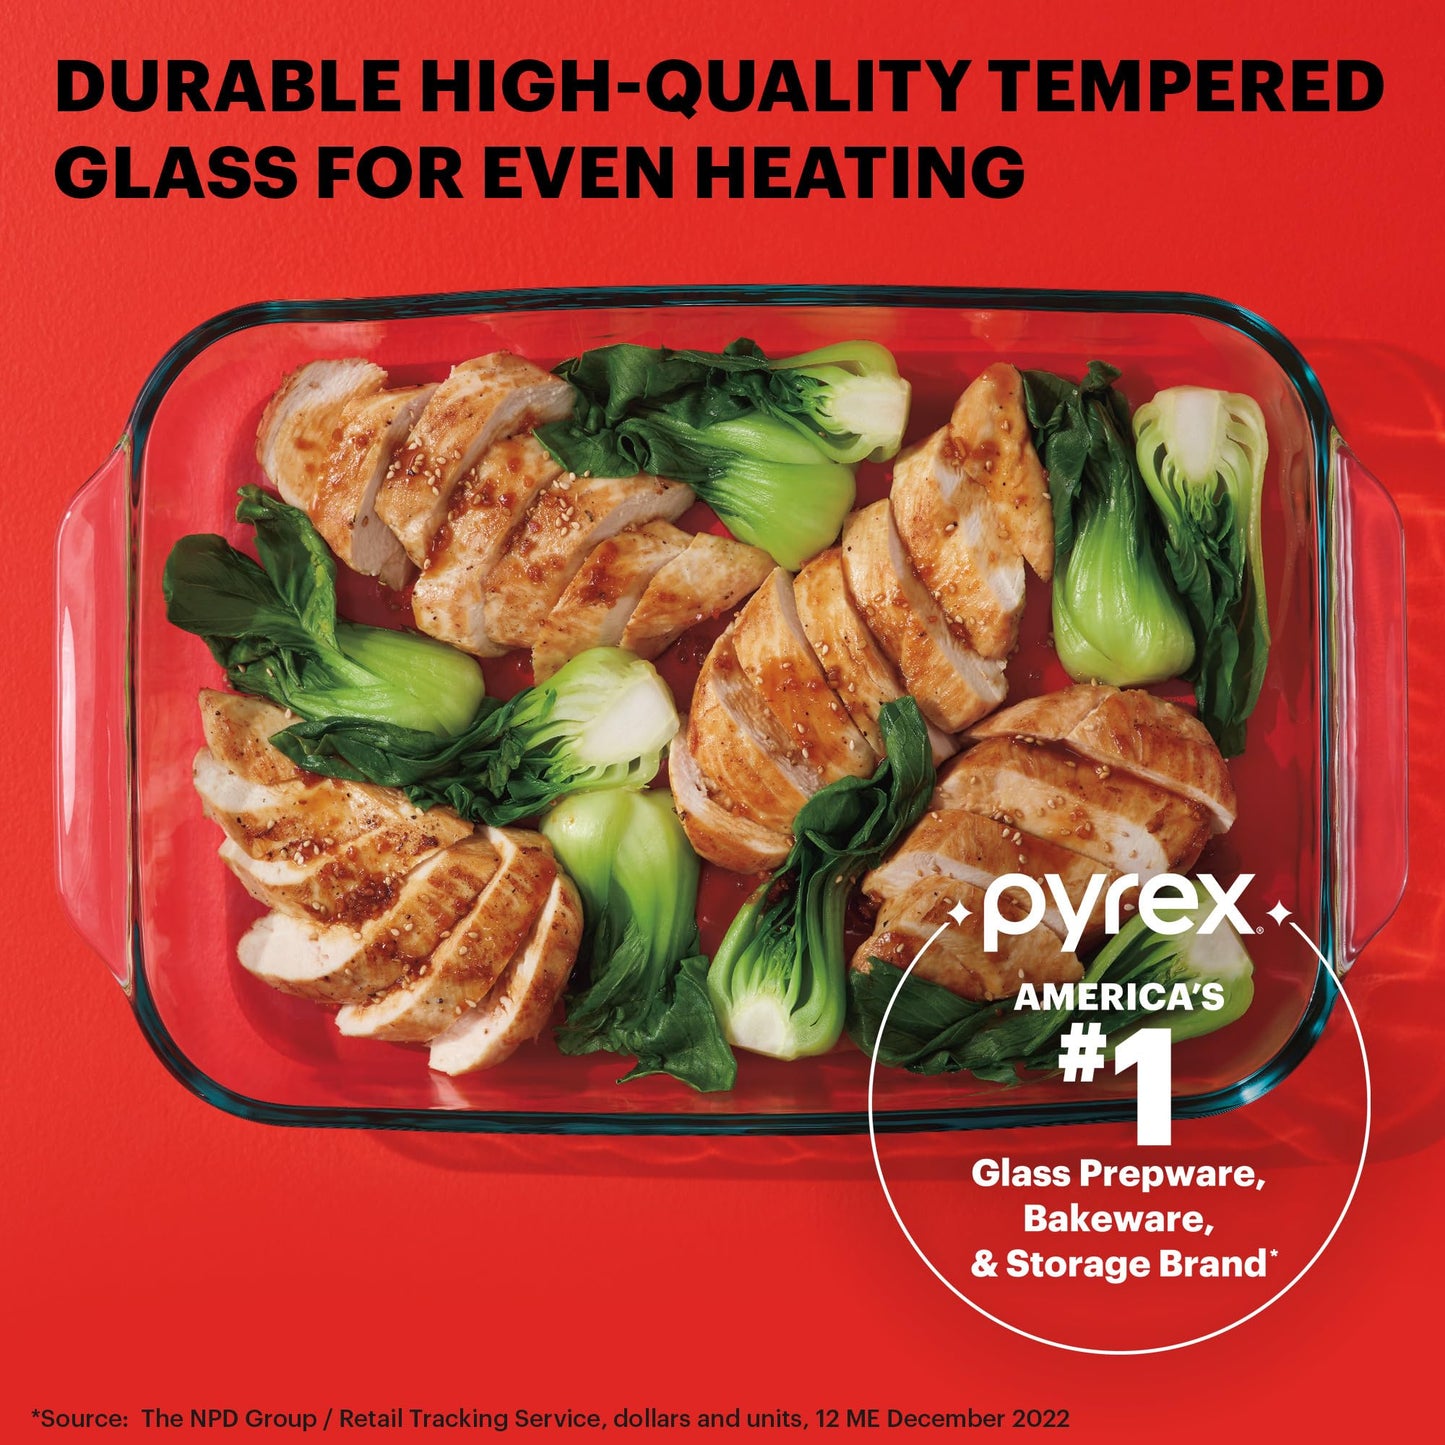 Pyrex Easy Grab 8-Piece Glass Baking Dishes With Lids, (1.5 QT, 2 QT, 3 QT, 8 INCH) Bakeware Sets, Freezer and Microwave Safe